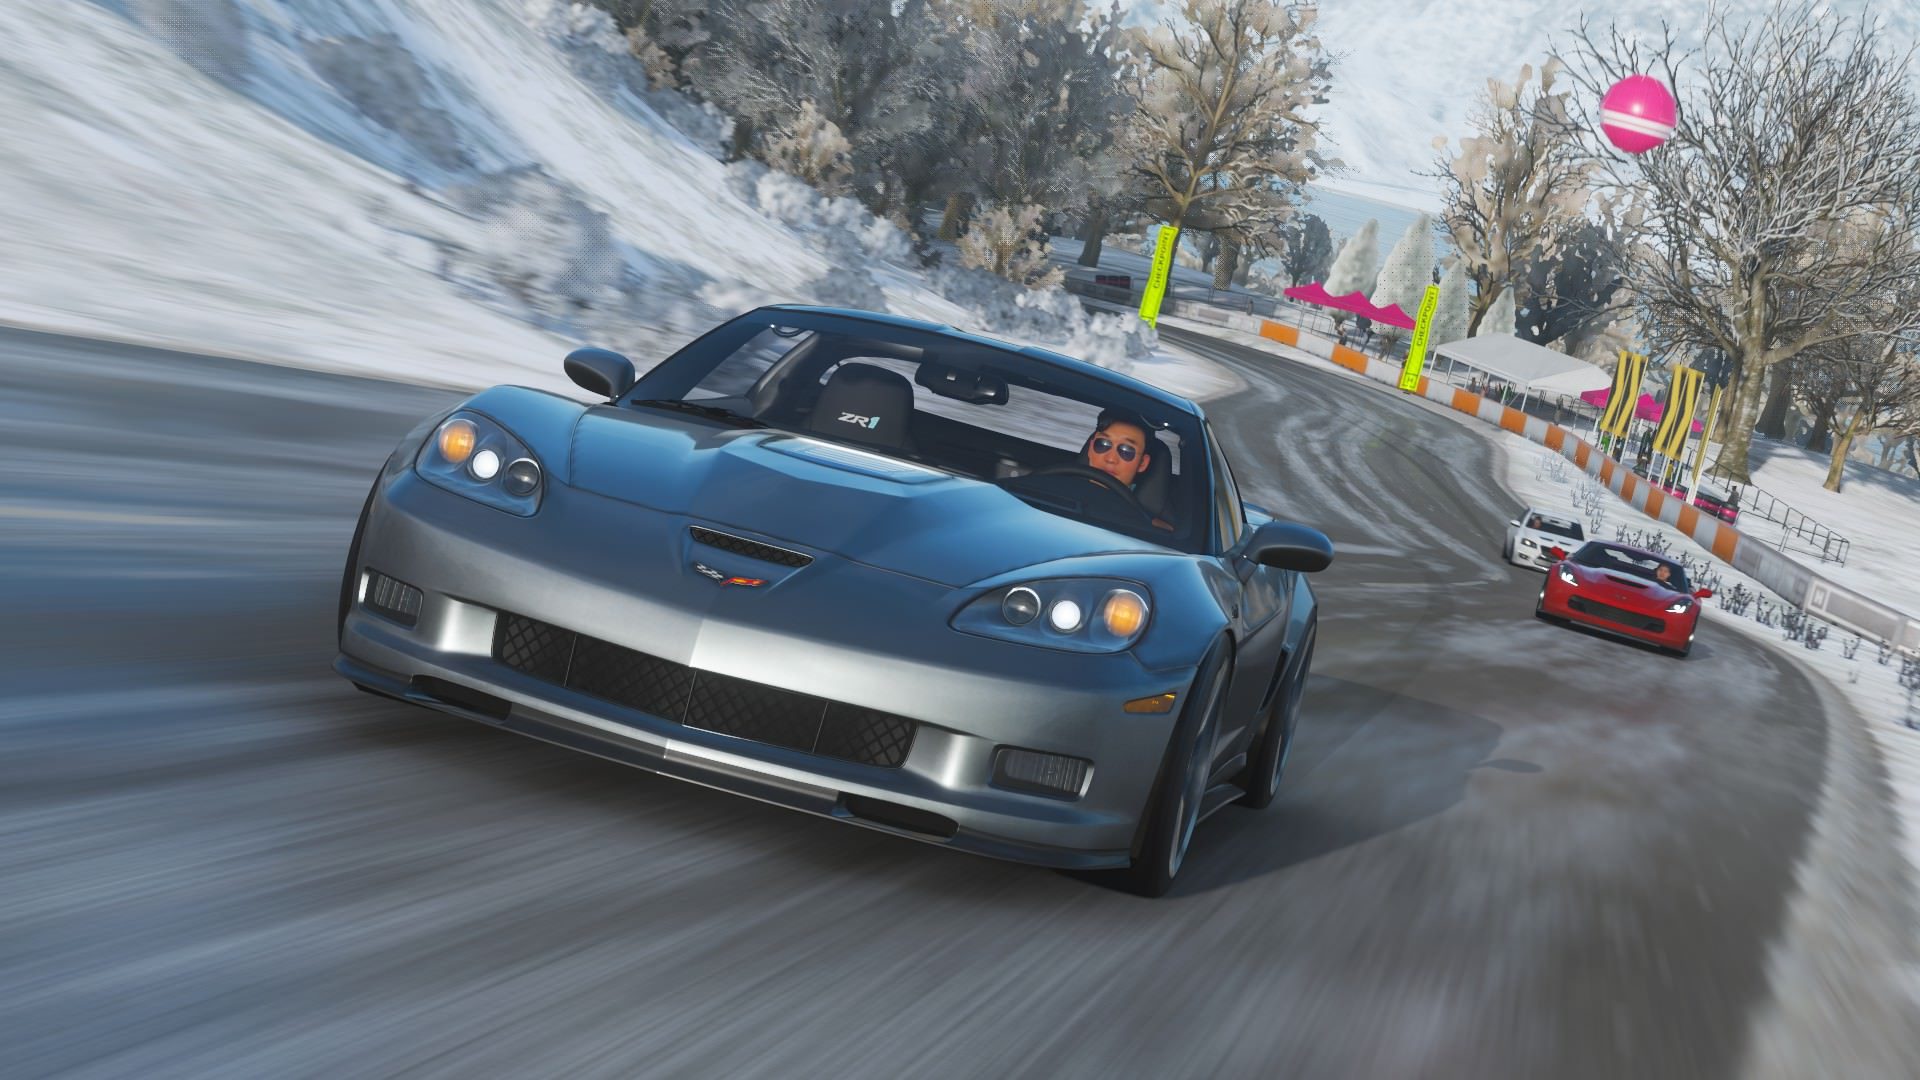 RWD domination in the current Winter Modern Muscles seasonal 3: Devilish driving of a certain Keith Ross and his signature C6 ZR1